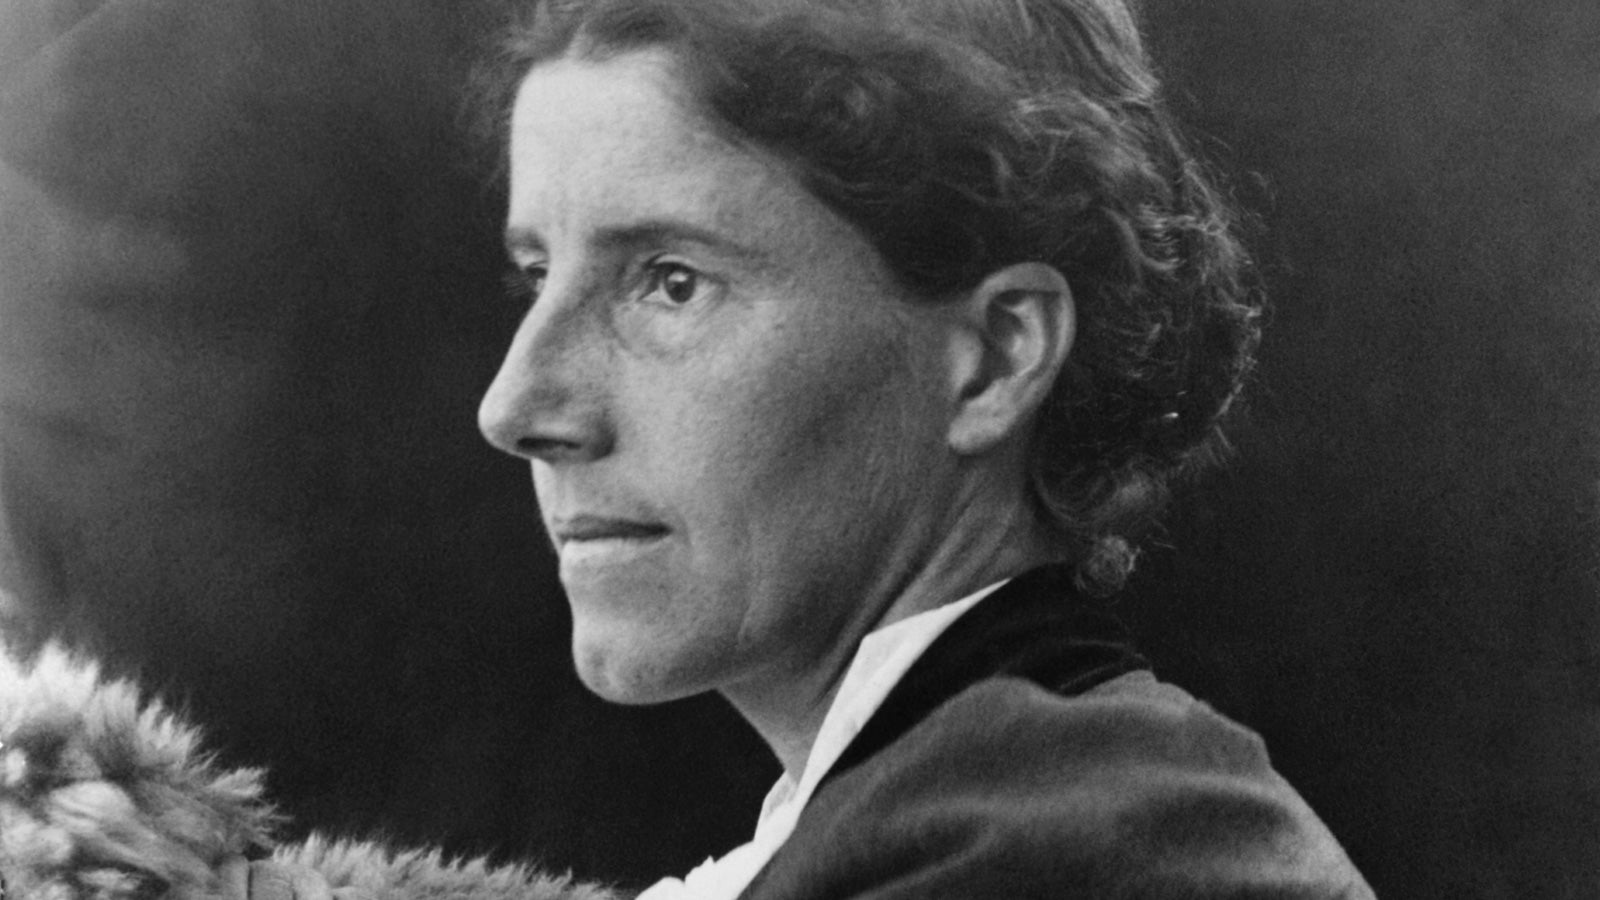 A black and white photograph of Charlotte Perkins Gilman taken in profile in roughly 1900